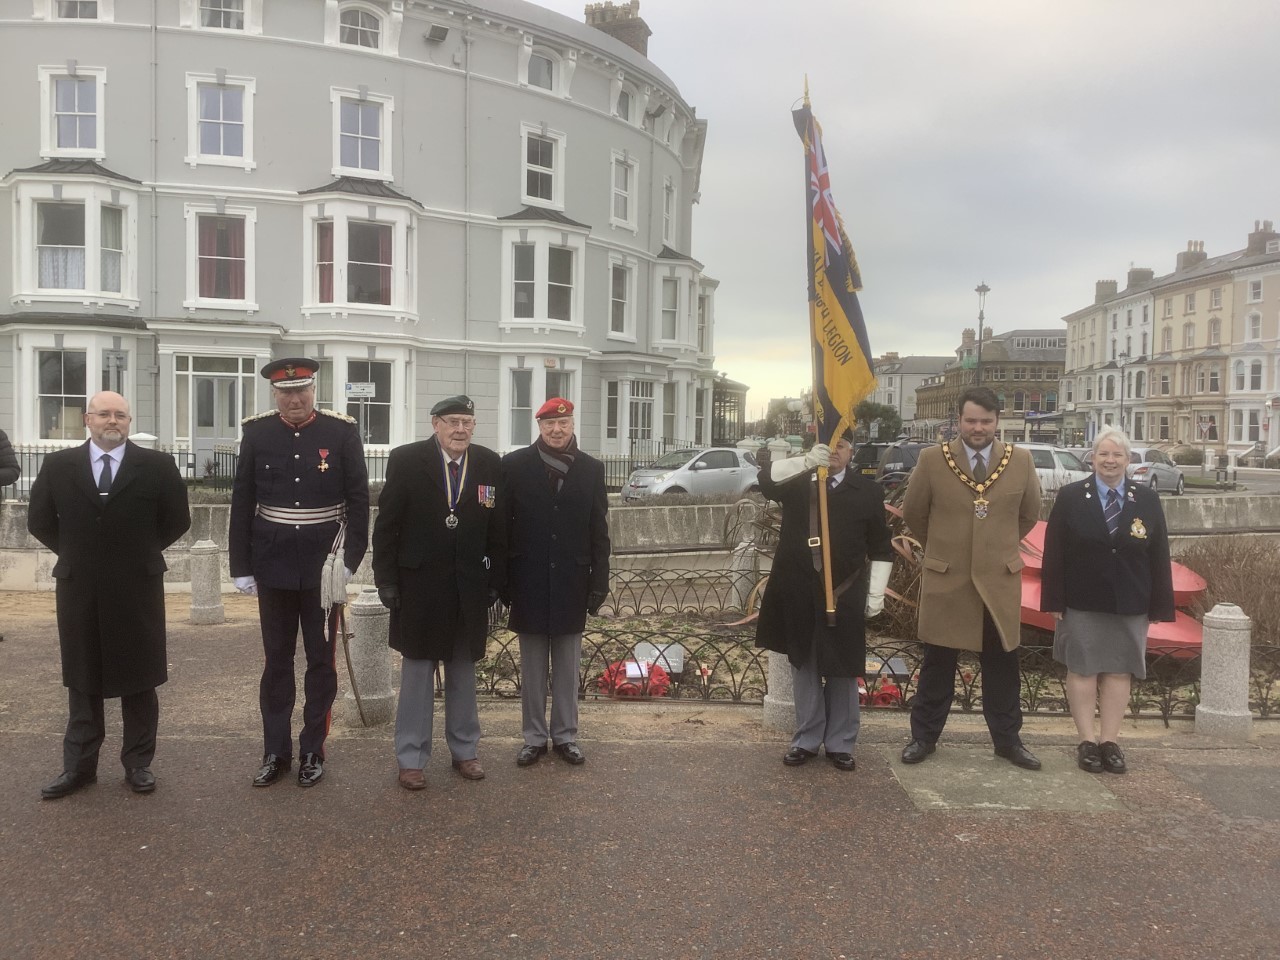 A plaque was unveiled at Llandudno’s war memorial gardens by the Lord Lieutenant of Clwyd, Henry Featherstonehaugh, and the mayor of Llandudno, cllr Harry Saville